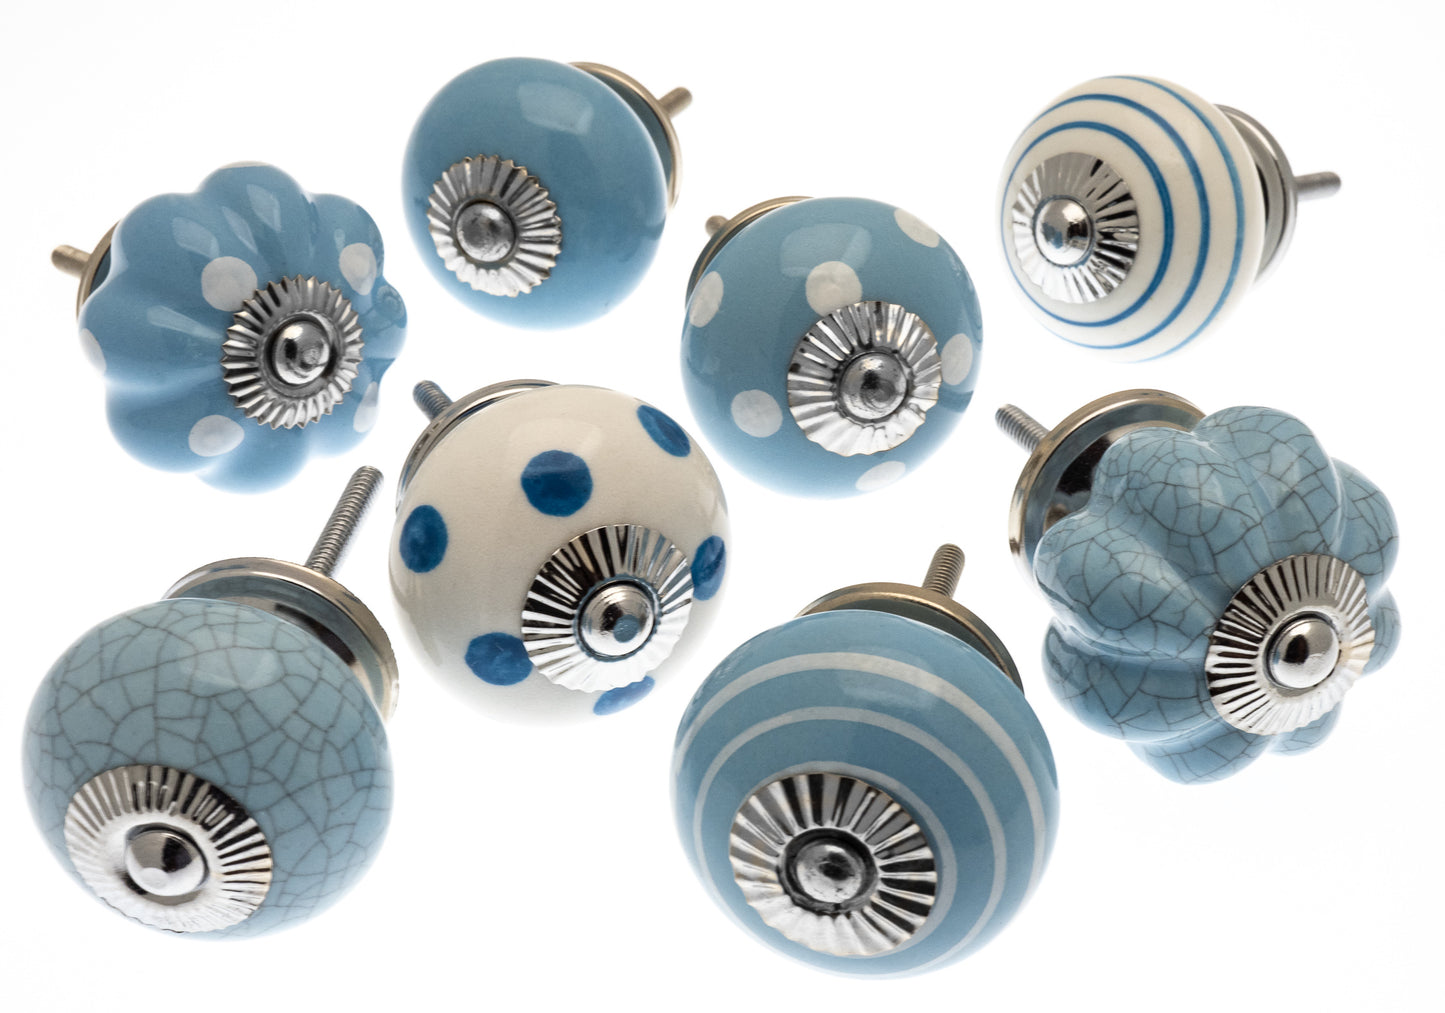 Ceramic Door Knobs in Pale Blue with Round and Flower Shape Designs  (Set of 8)